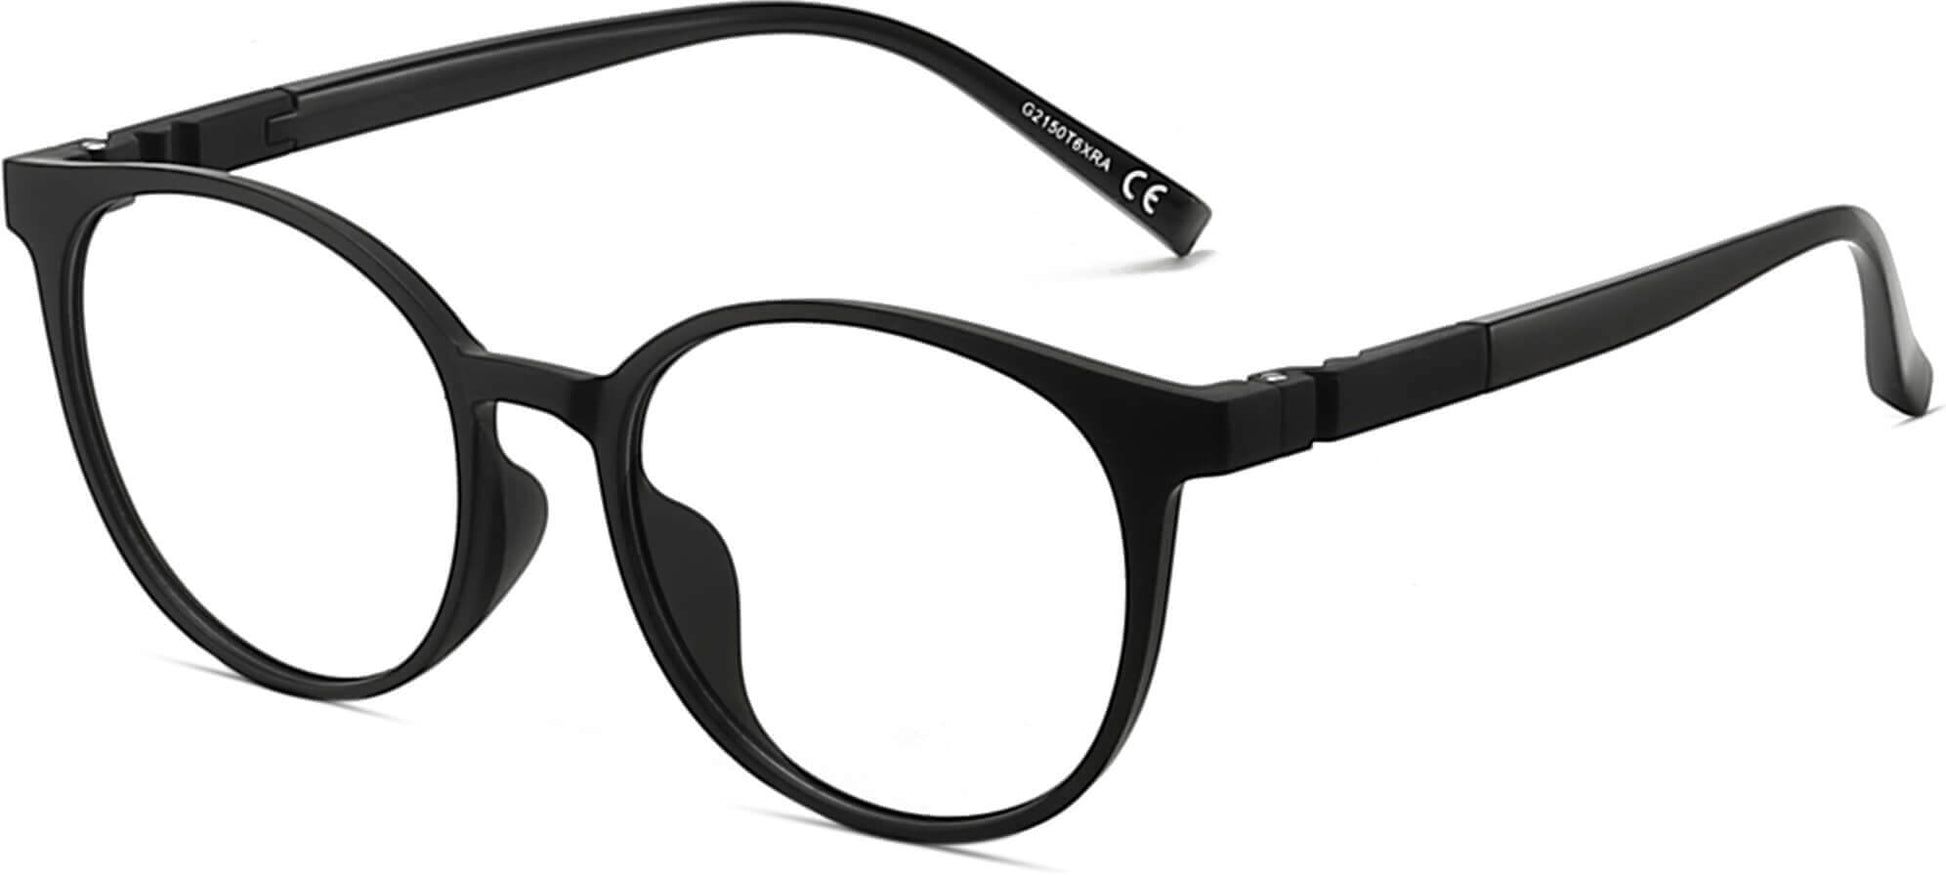 Calvin Round Black Eyeglasses from ANRRI, angle view